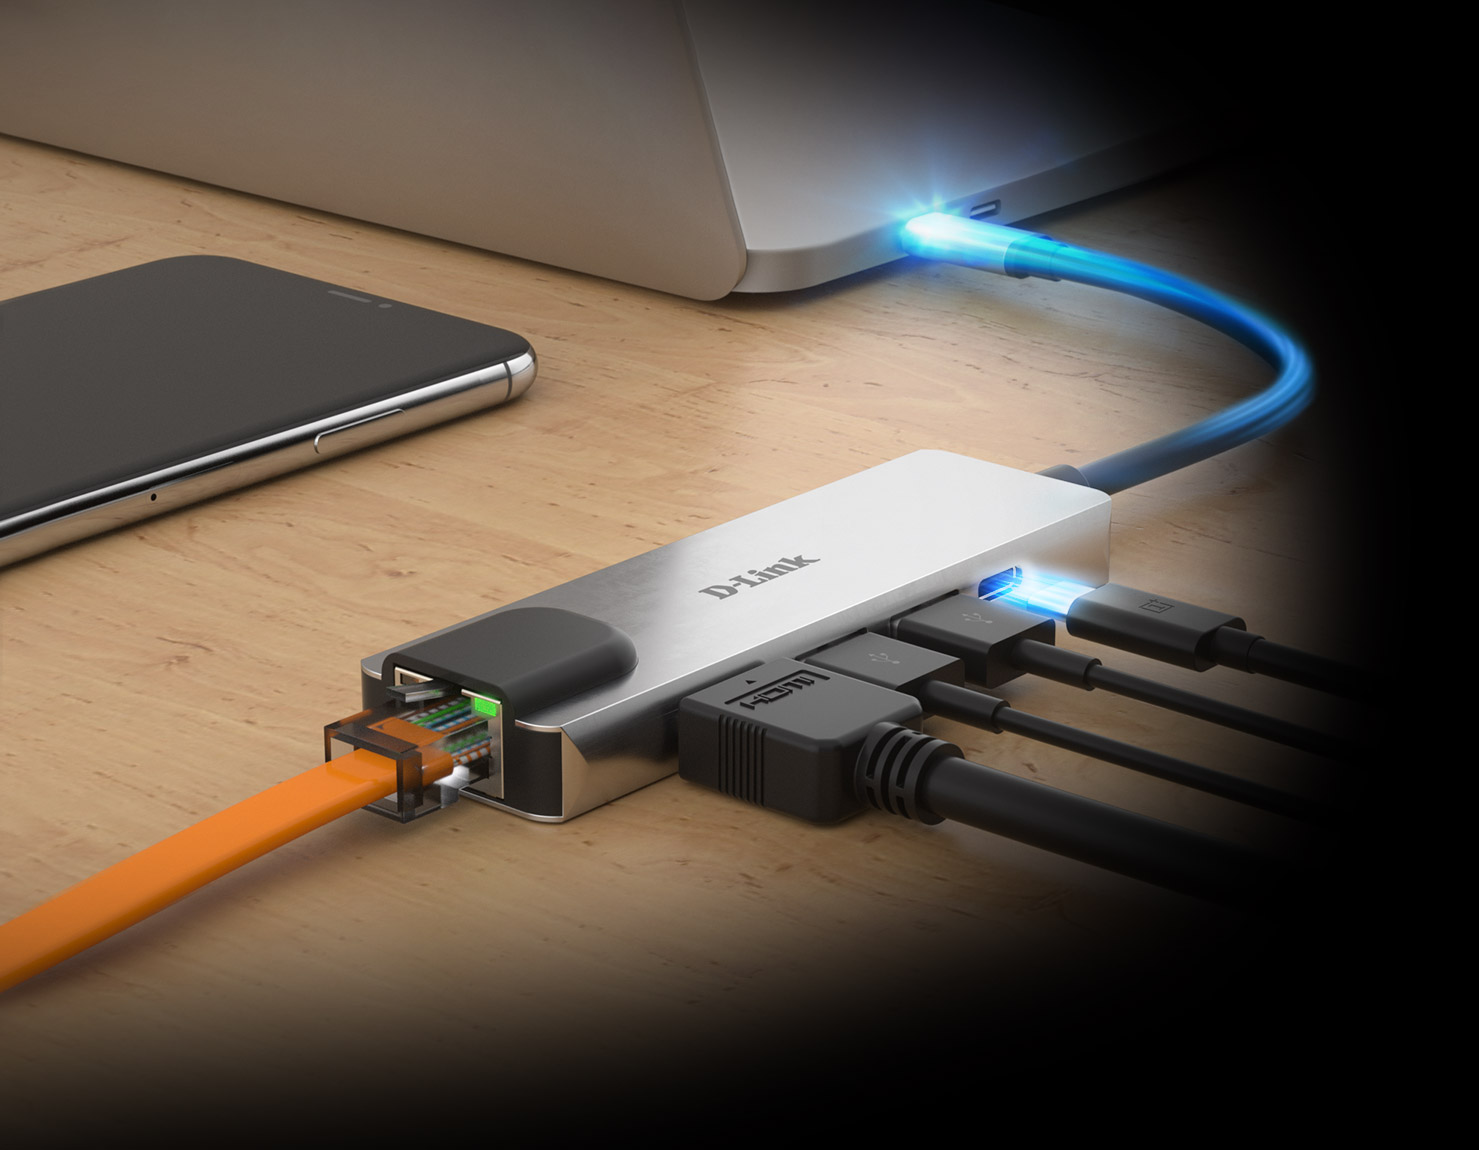 DUB-M520 5-in-1 USB-C Hub with HDMI/Ethernet and Power Delivery with Power Delivery to a laptop and example connections